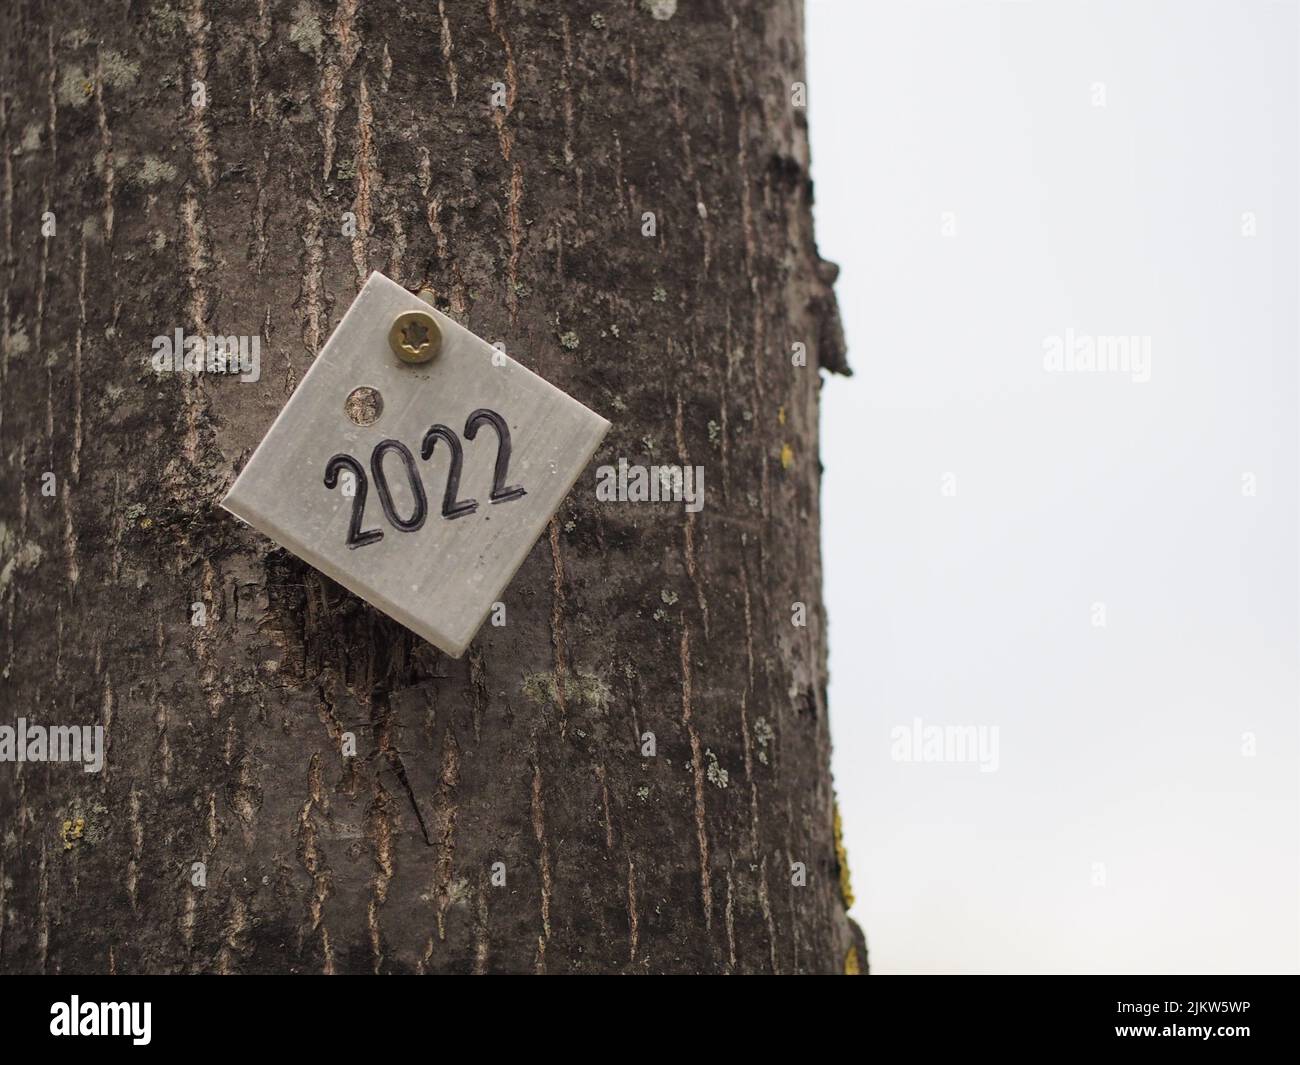 A closeup of a rectangular white piece with a written 2022 number attached to the tree stem Stock Photo